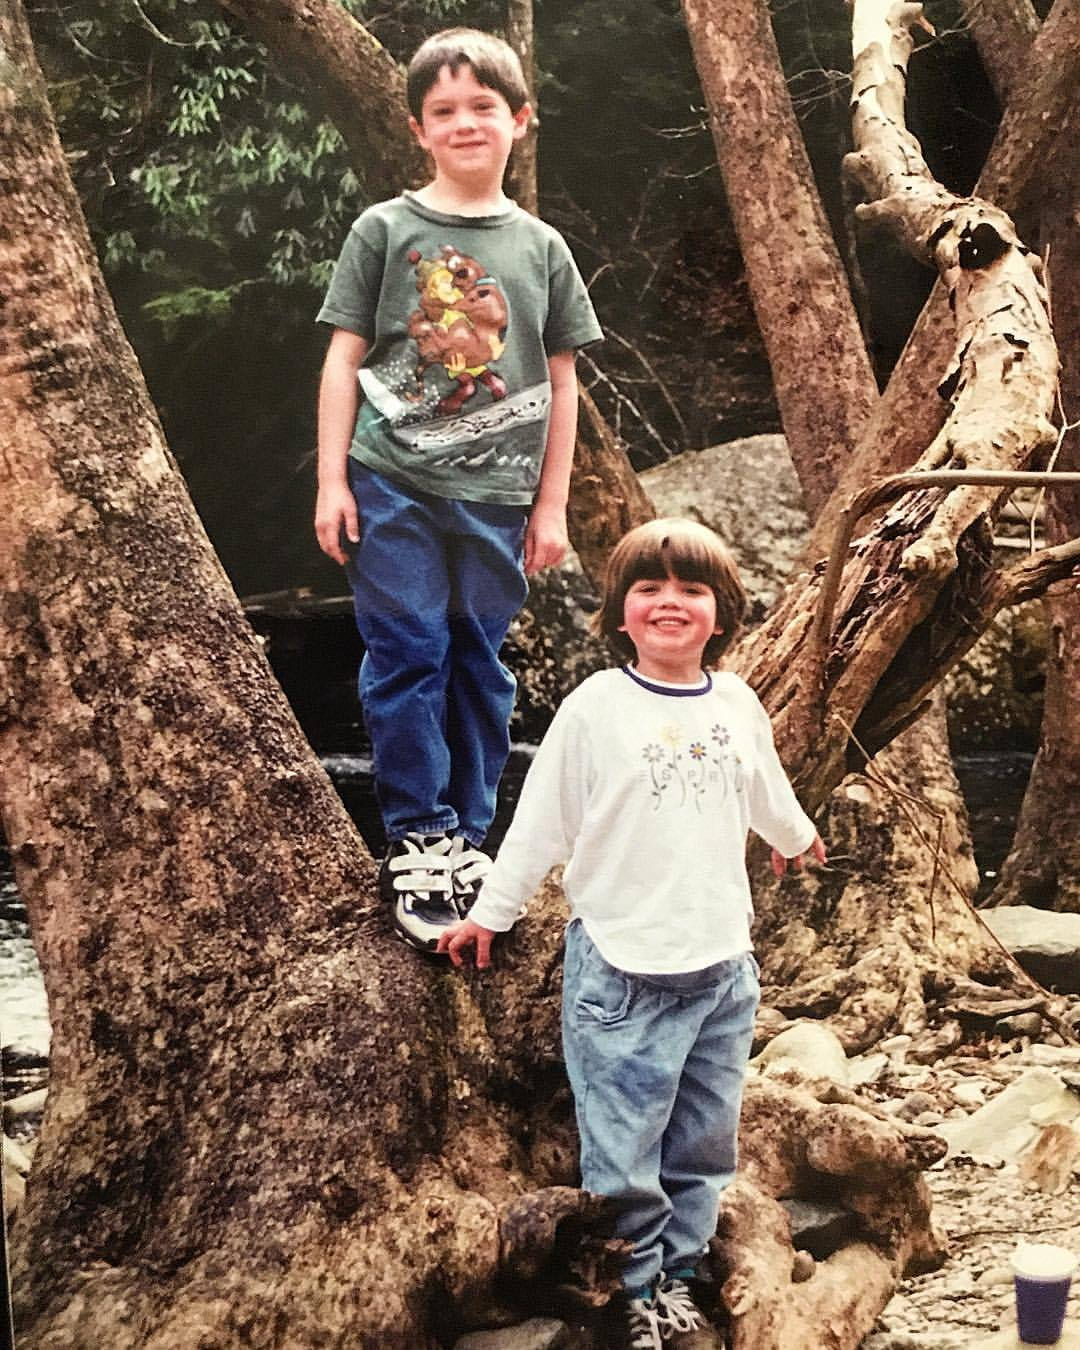 The author and his sister in childhood climbing a tree.